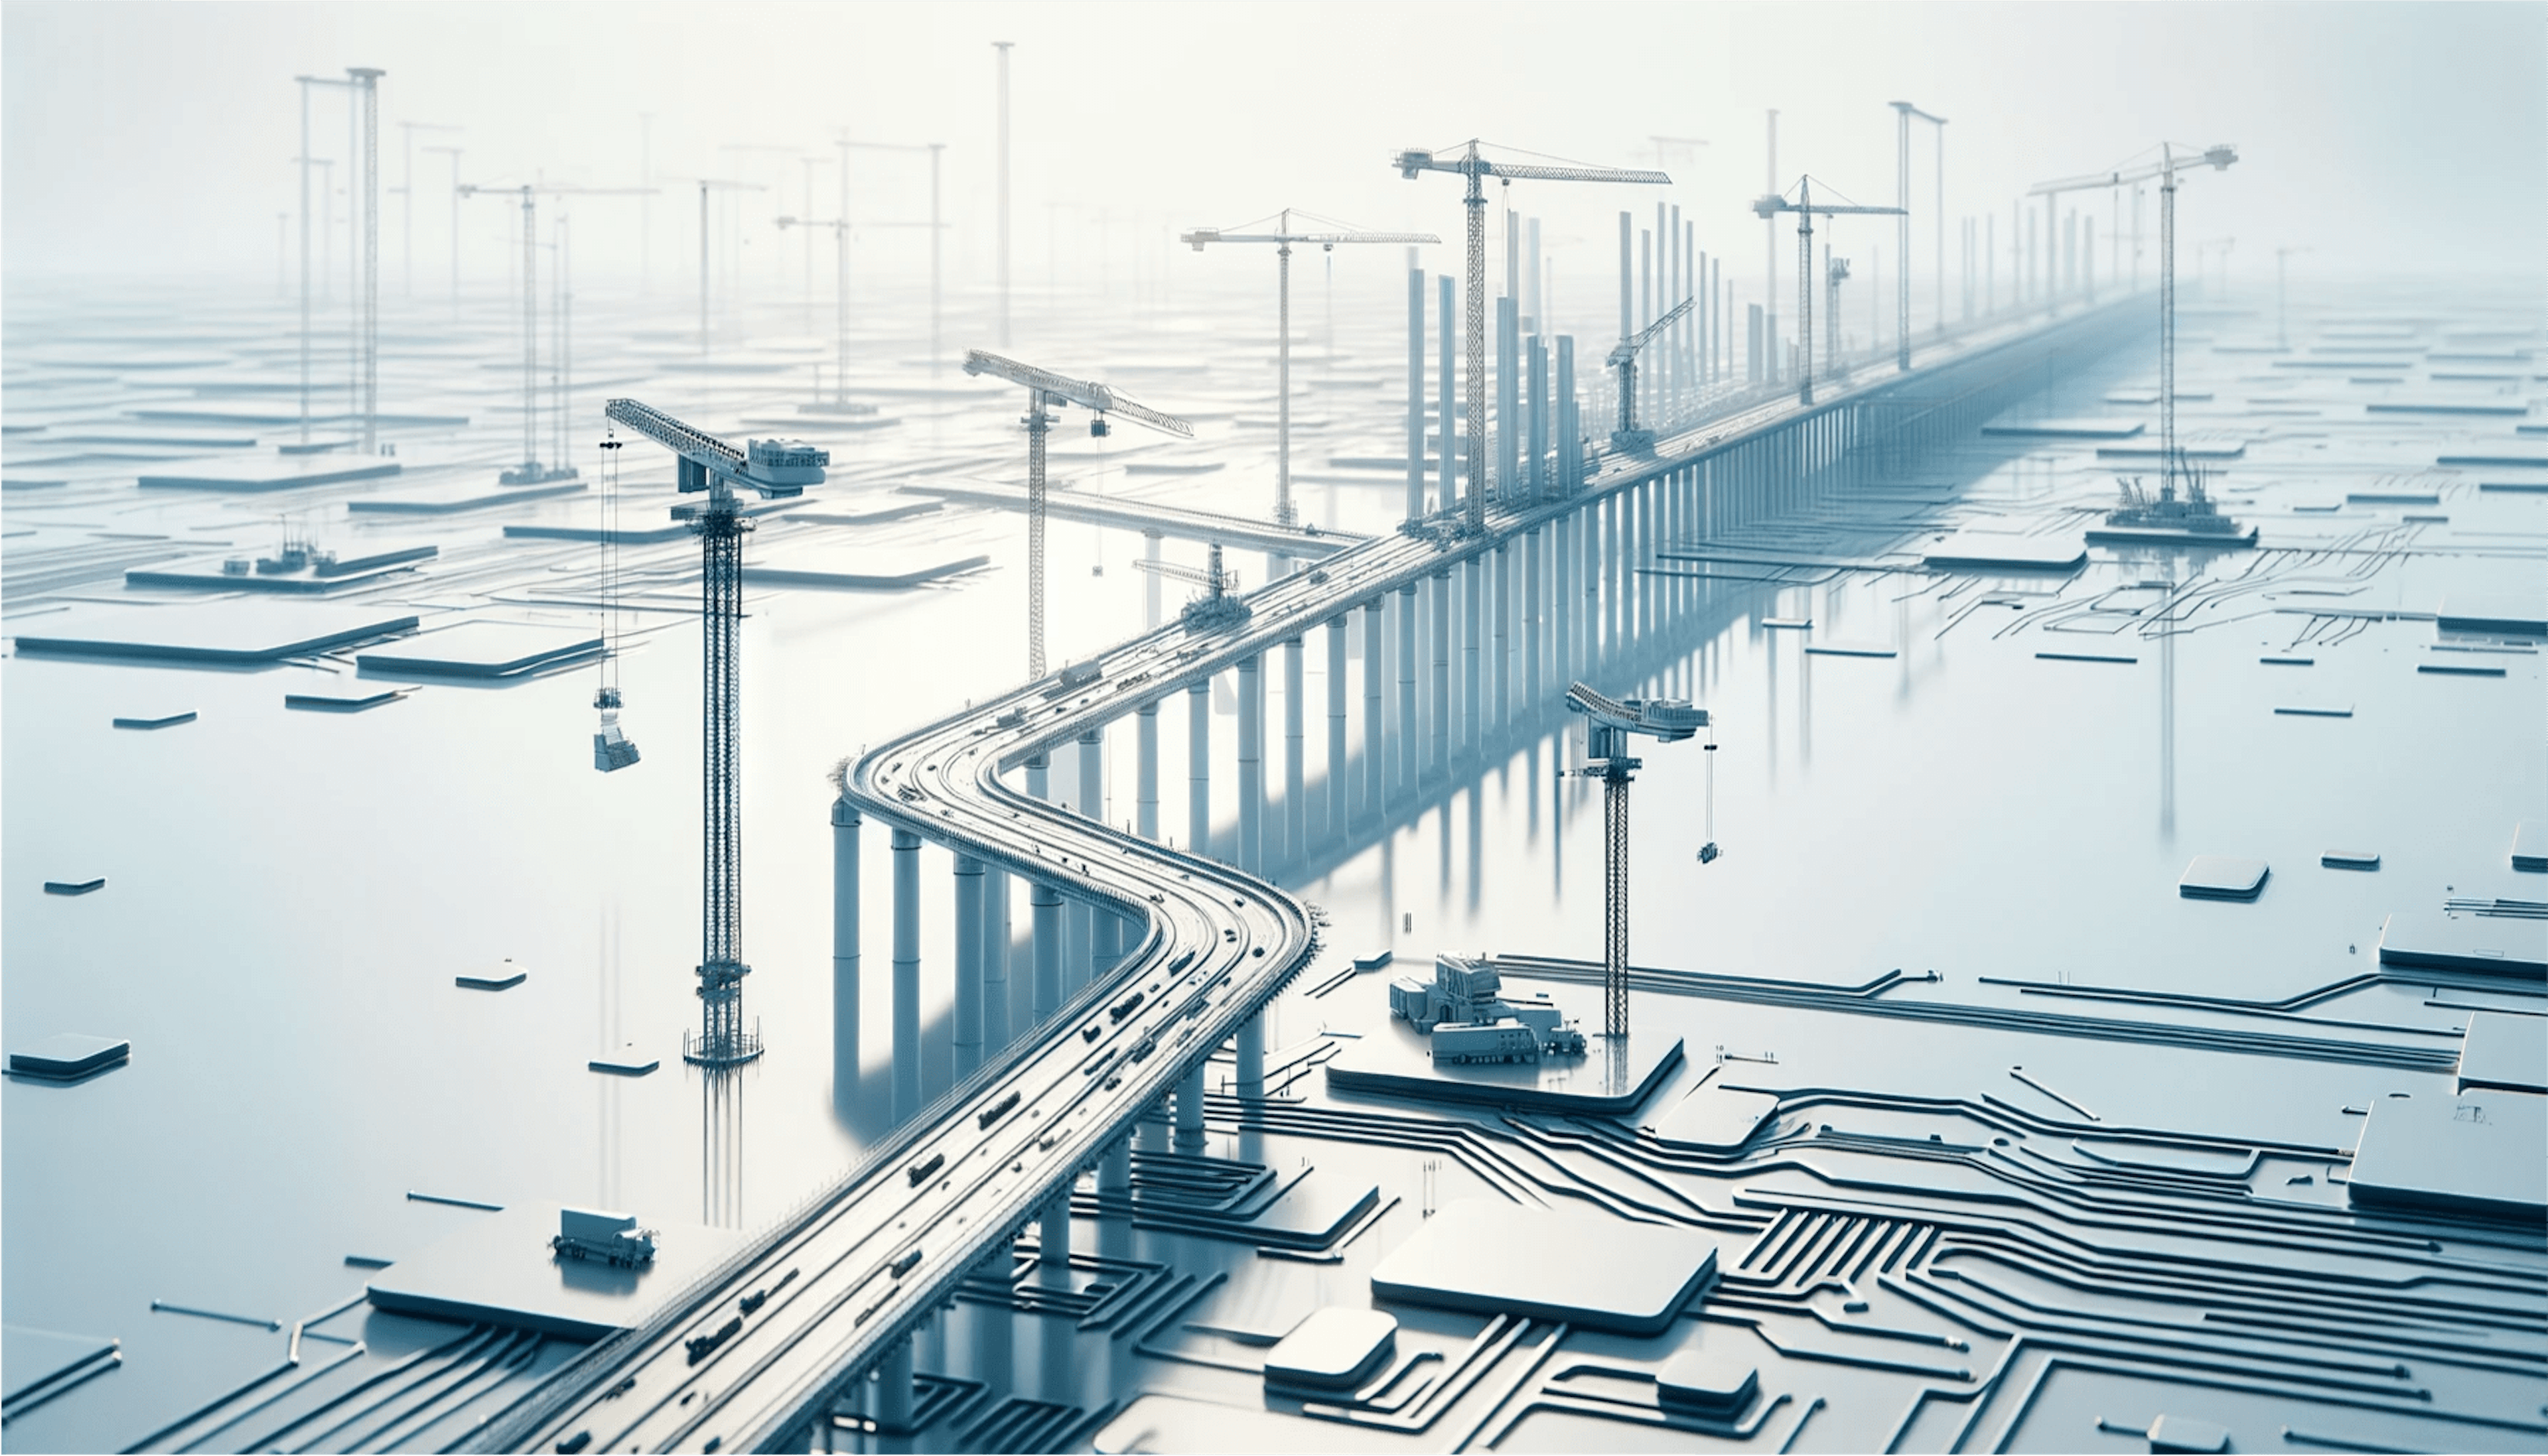 Digital illustration of a futuristic bridge construction with cranes and vehicles on a circuit board-like surface, symbolizing advanced infrastructure.